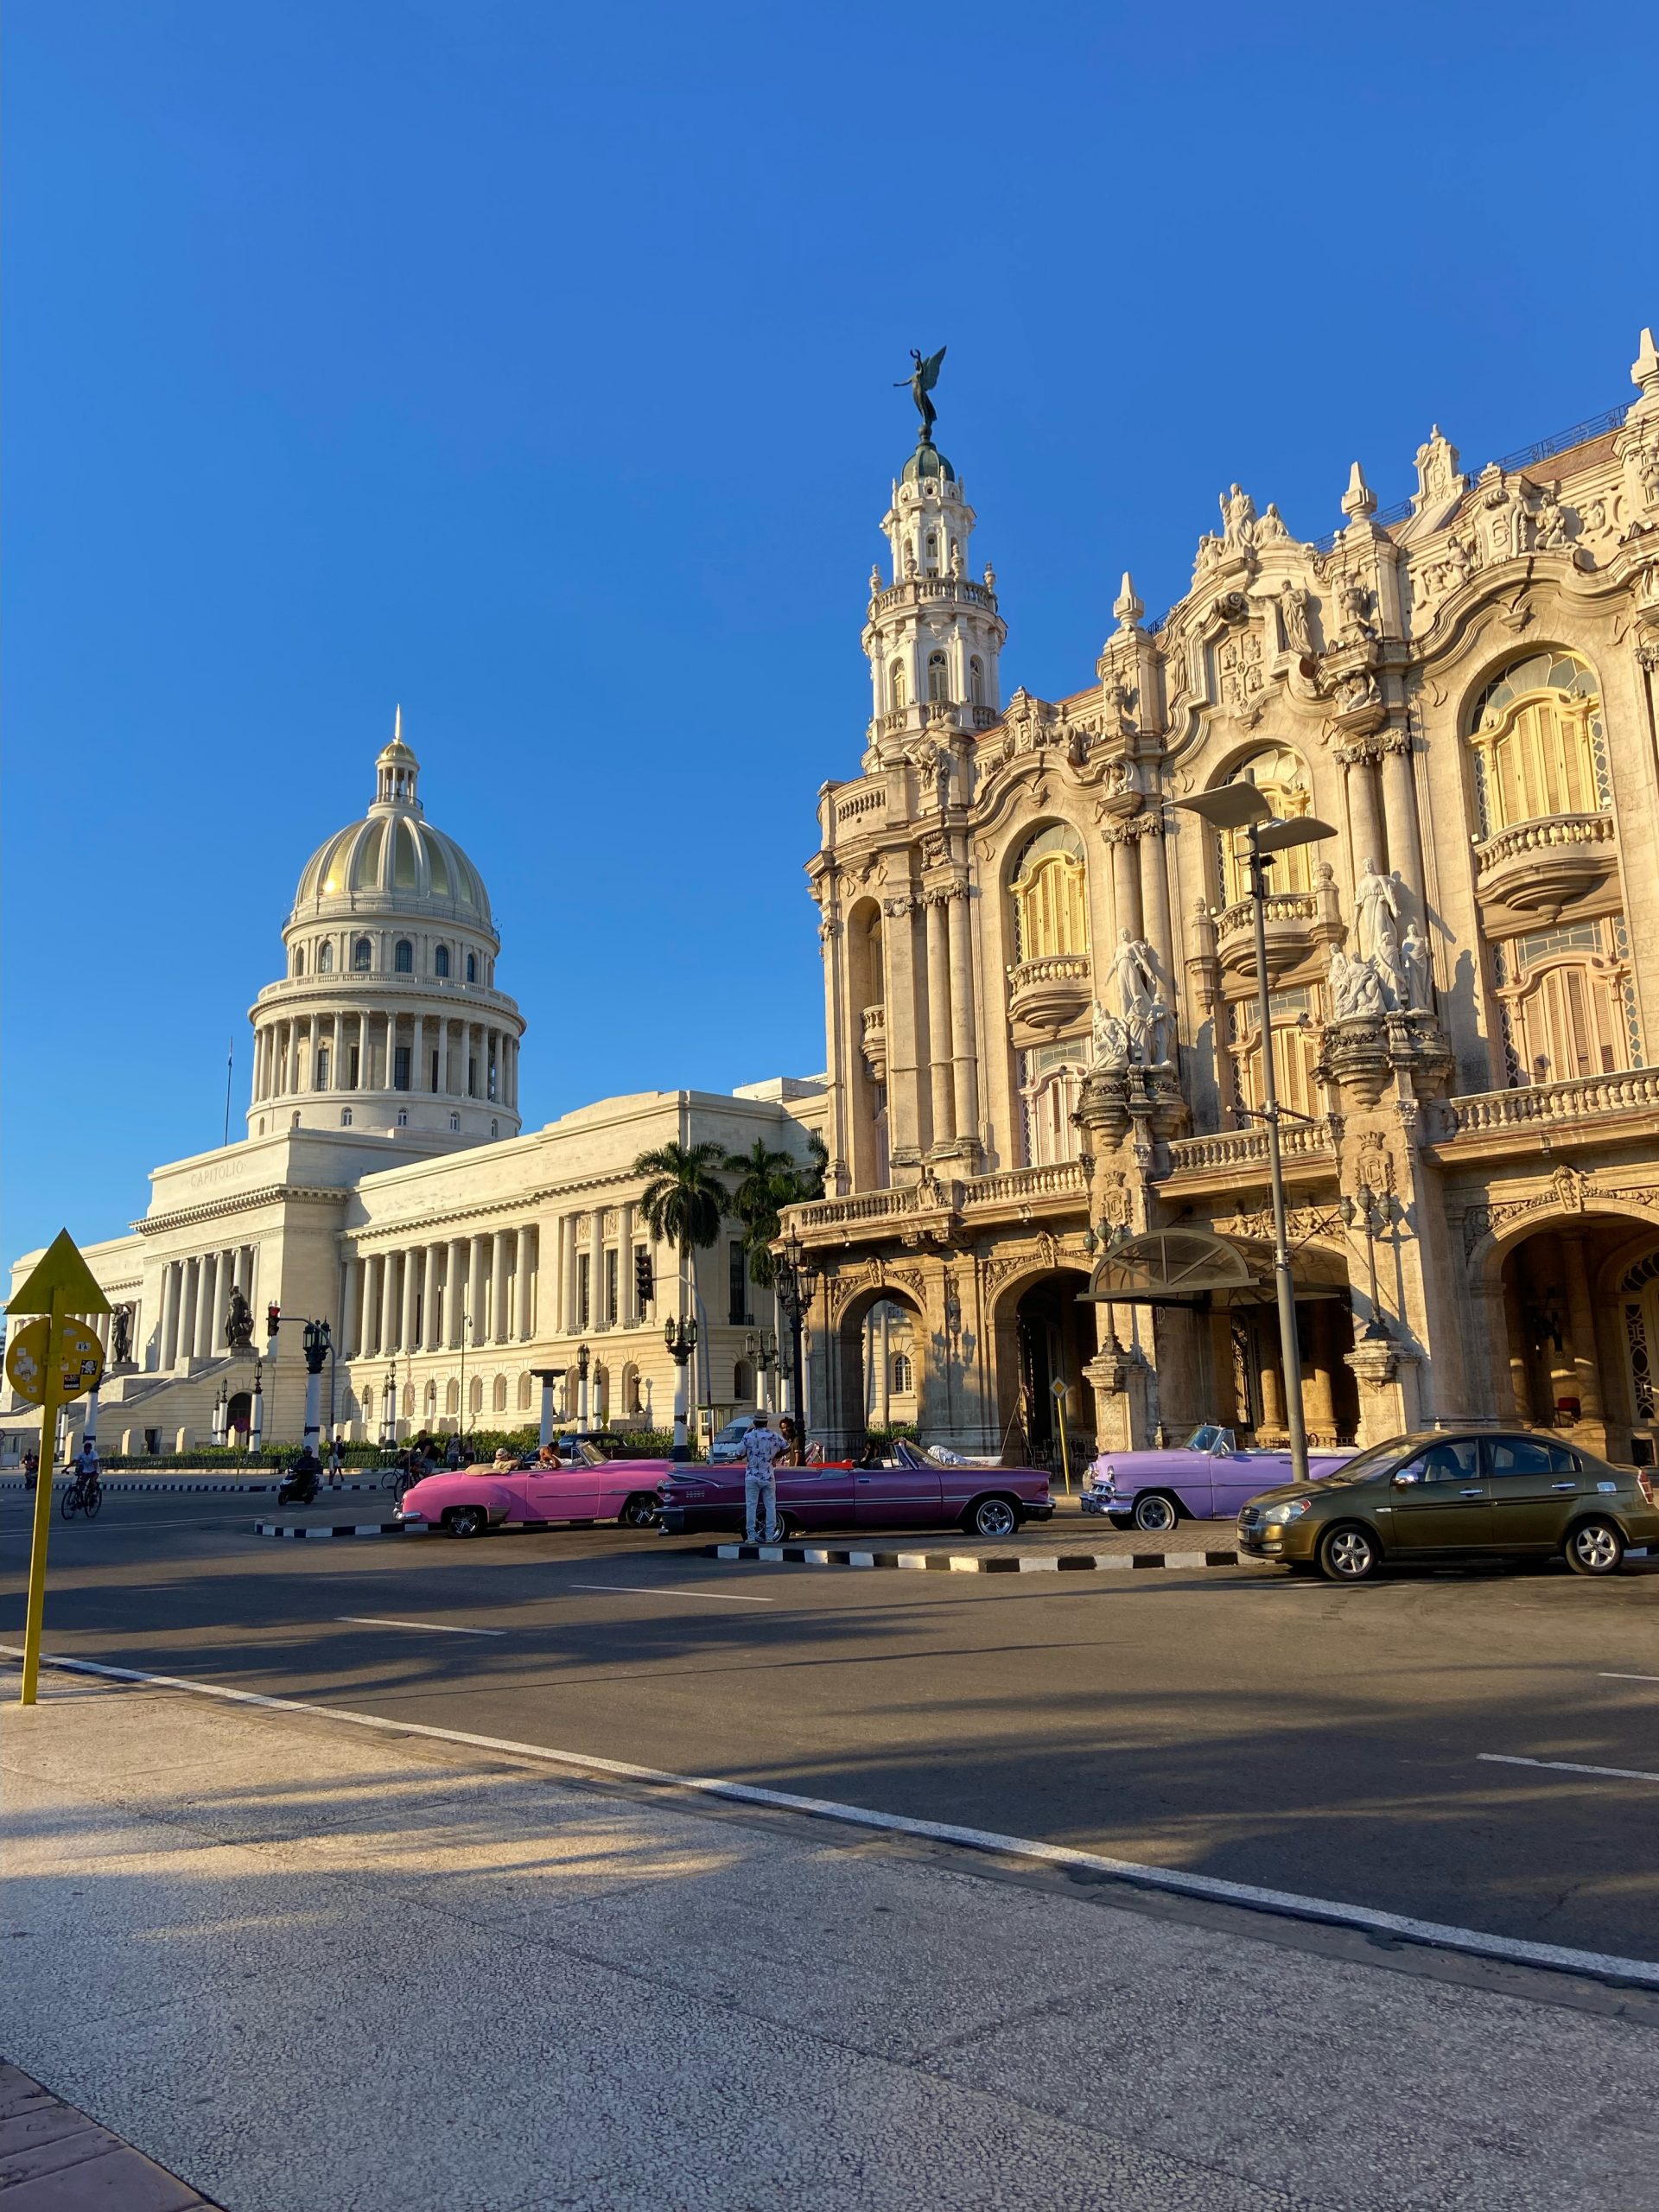 4 Common Scams To Look Out For In Havana, Cuba